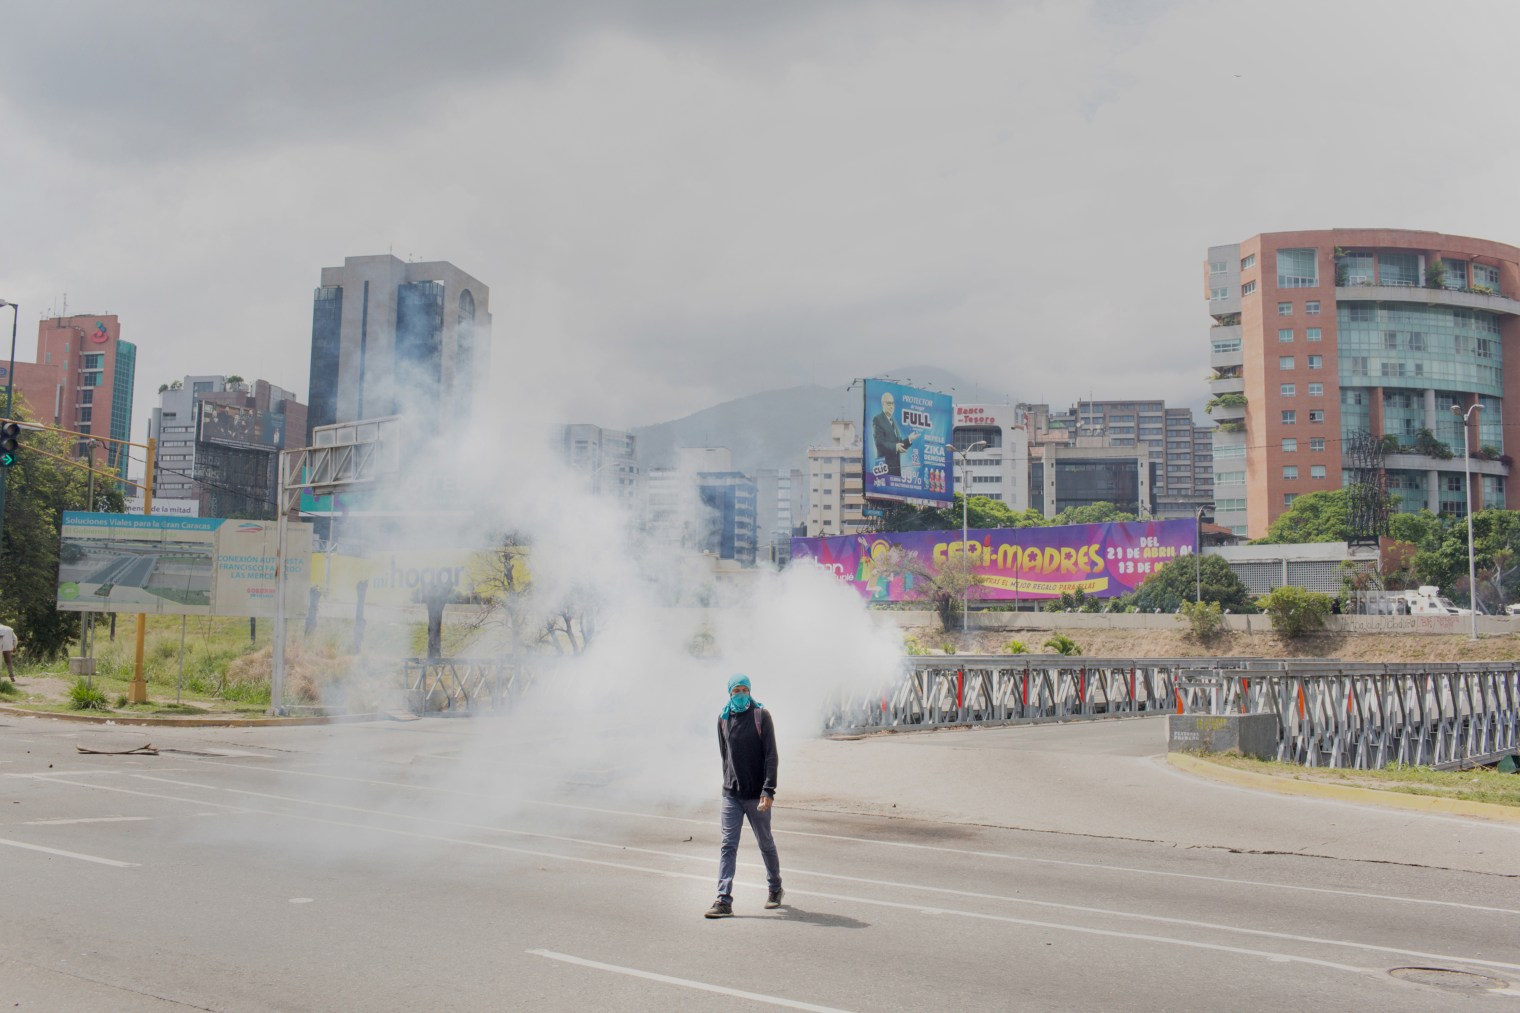 A masked protester walks during a clash with authorities after a silent march honoring the martyrs in Caracas on April 22, 2017.